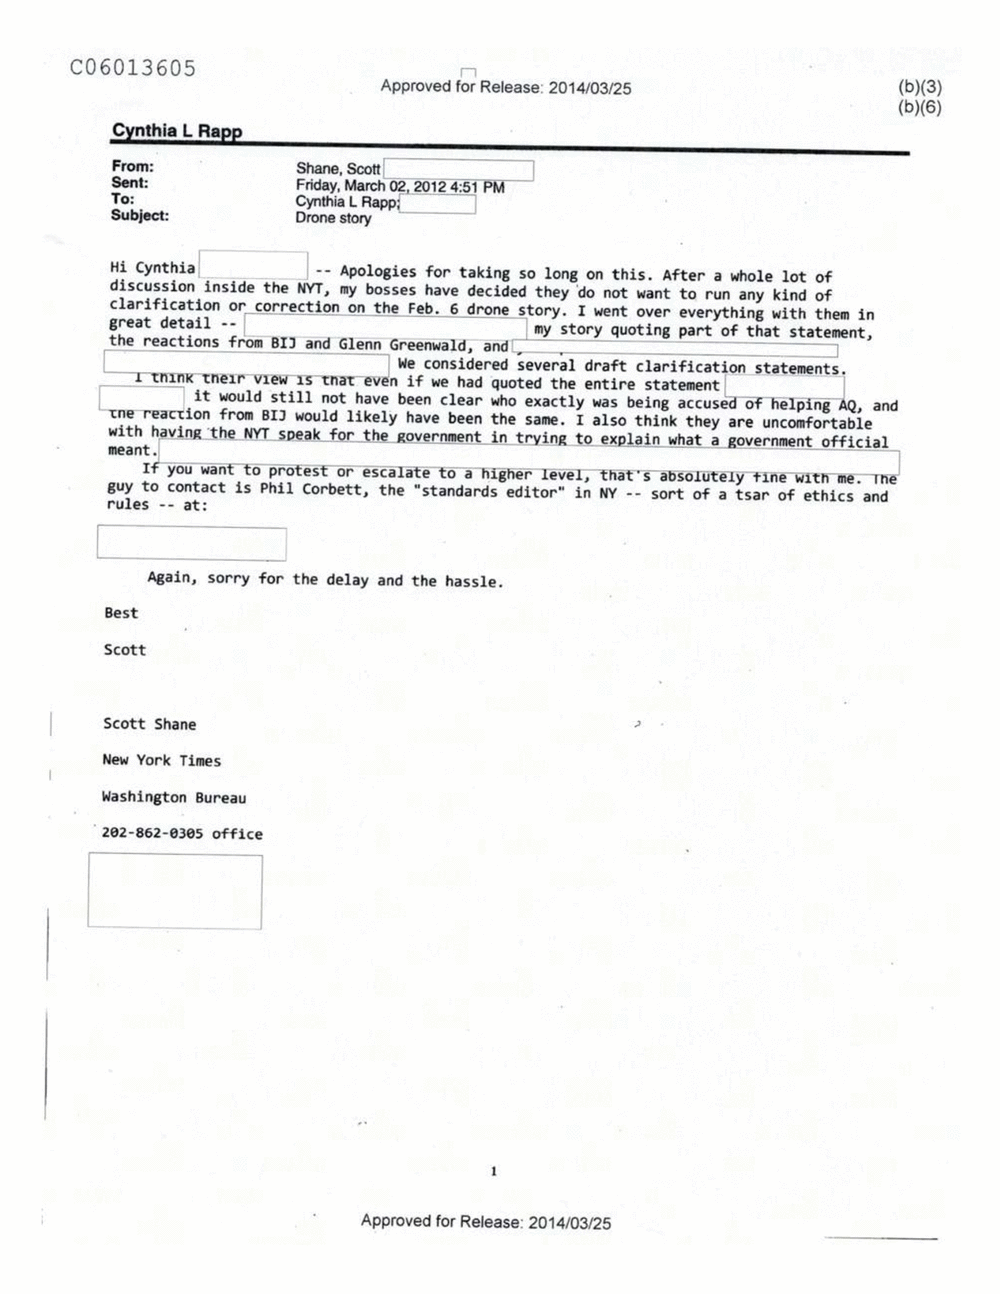 Page 414 from Email Correspondence Between Reporters and CIA Flacks